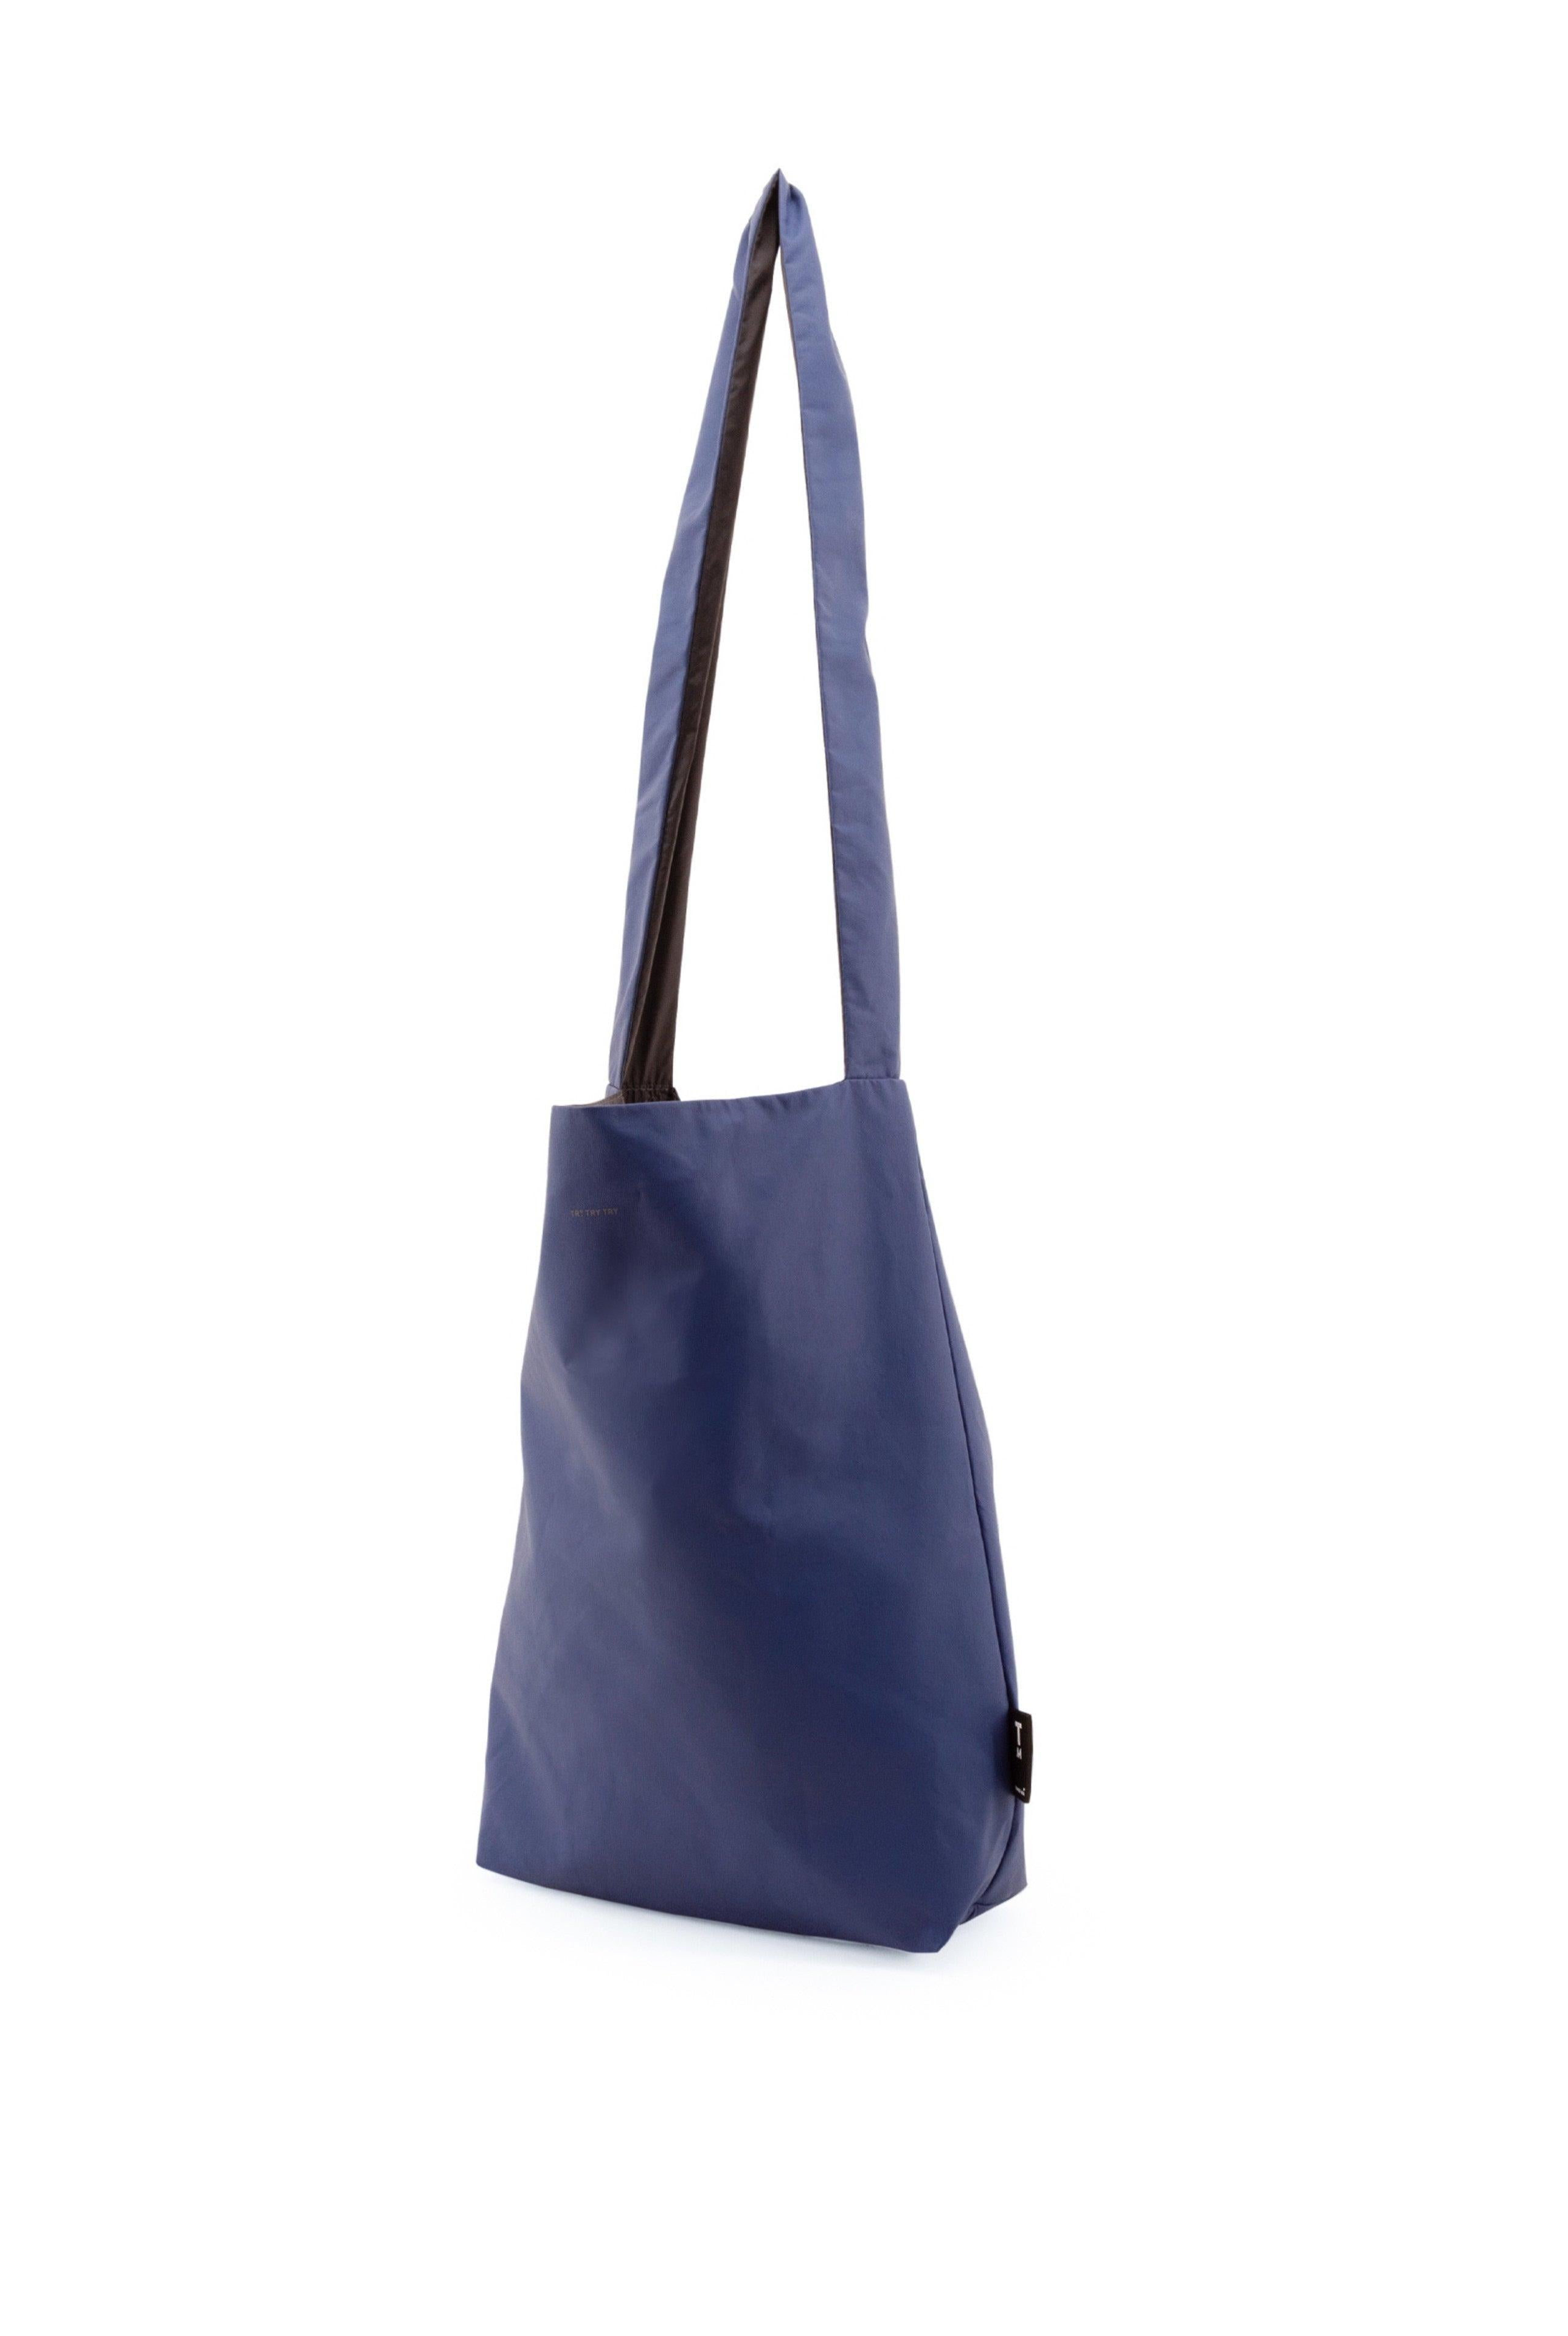 FEEL GOOD BAG-SHOPPER - Dutch blue (try try try) - Oh Happy Life